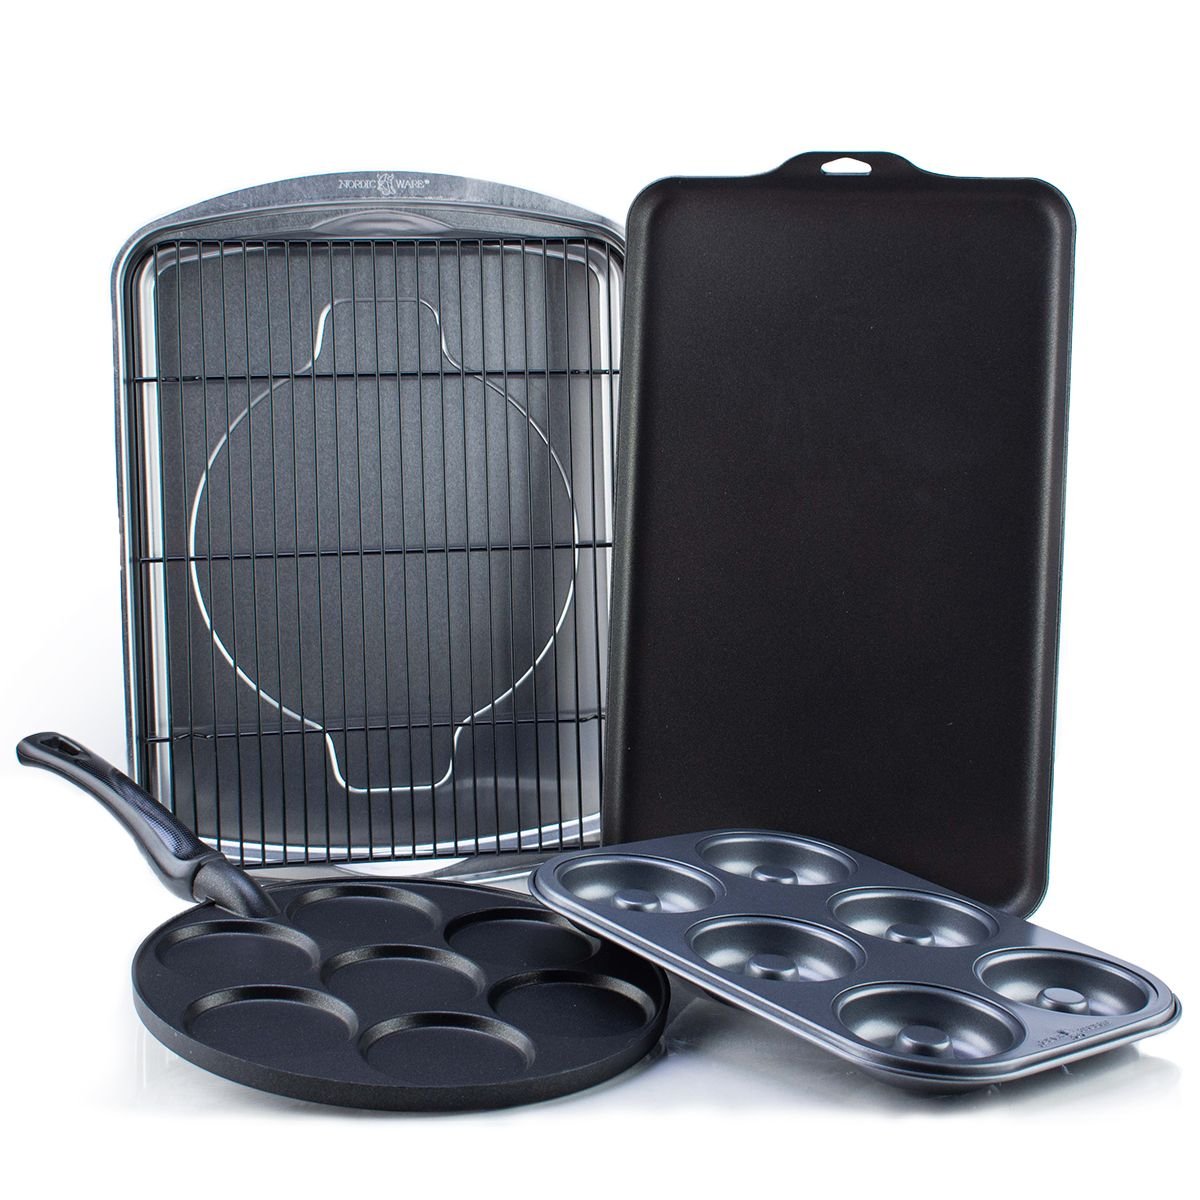 Oven Bacon Baking Pan Set by Nordic Ware